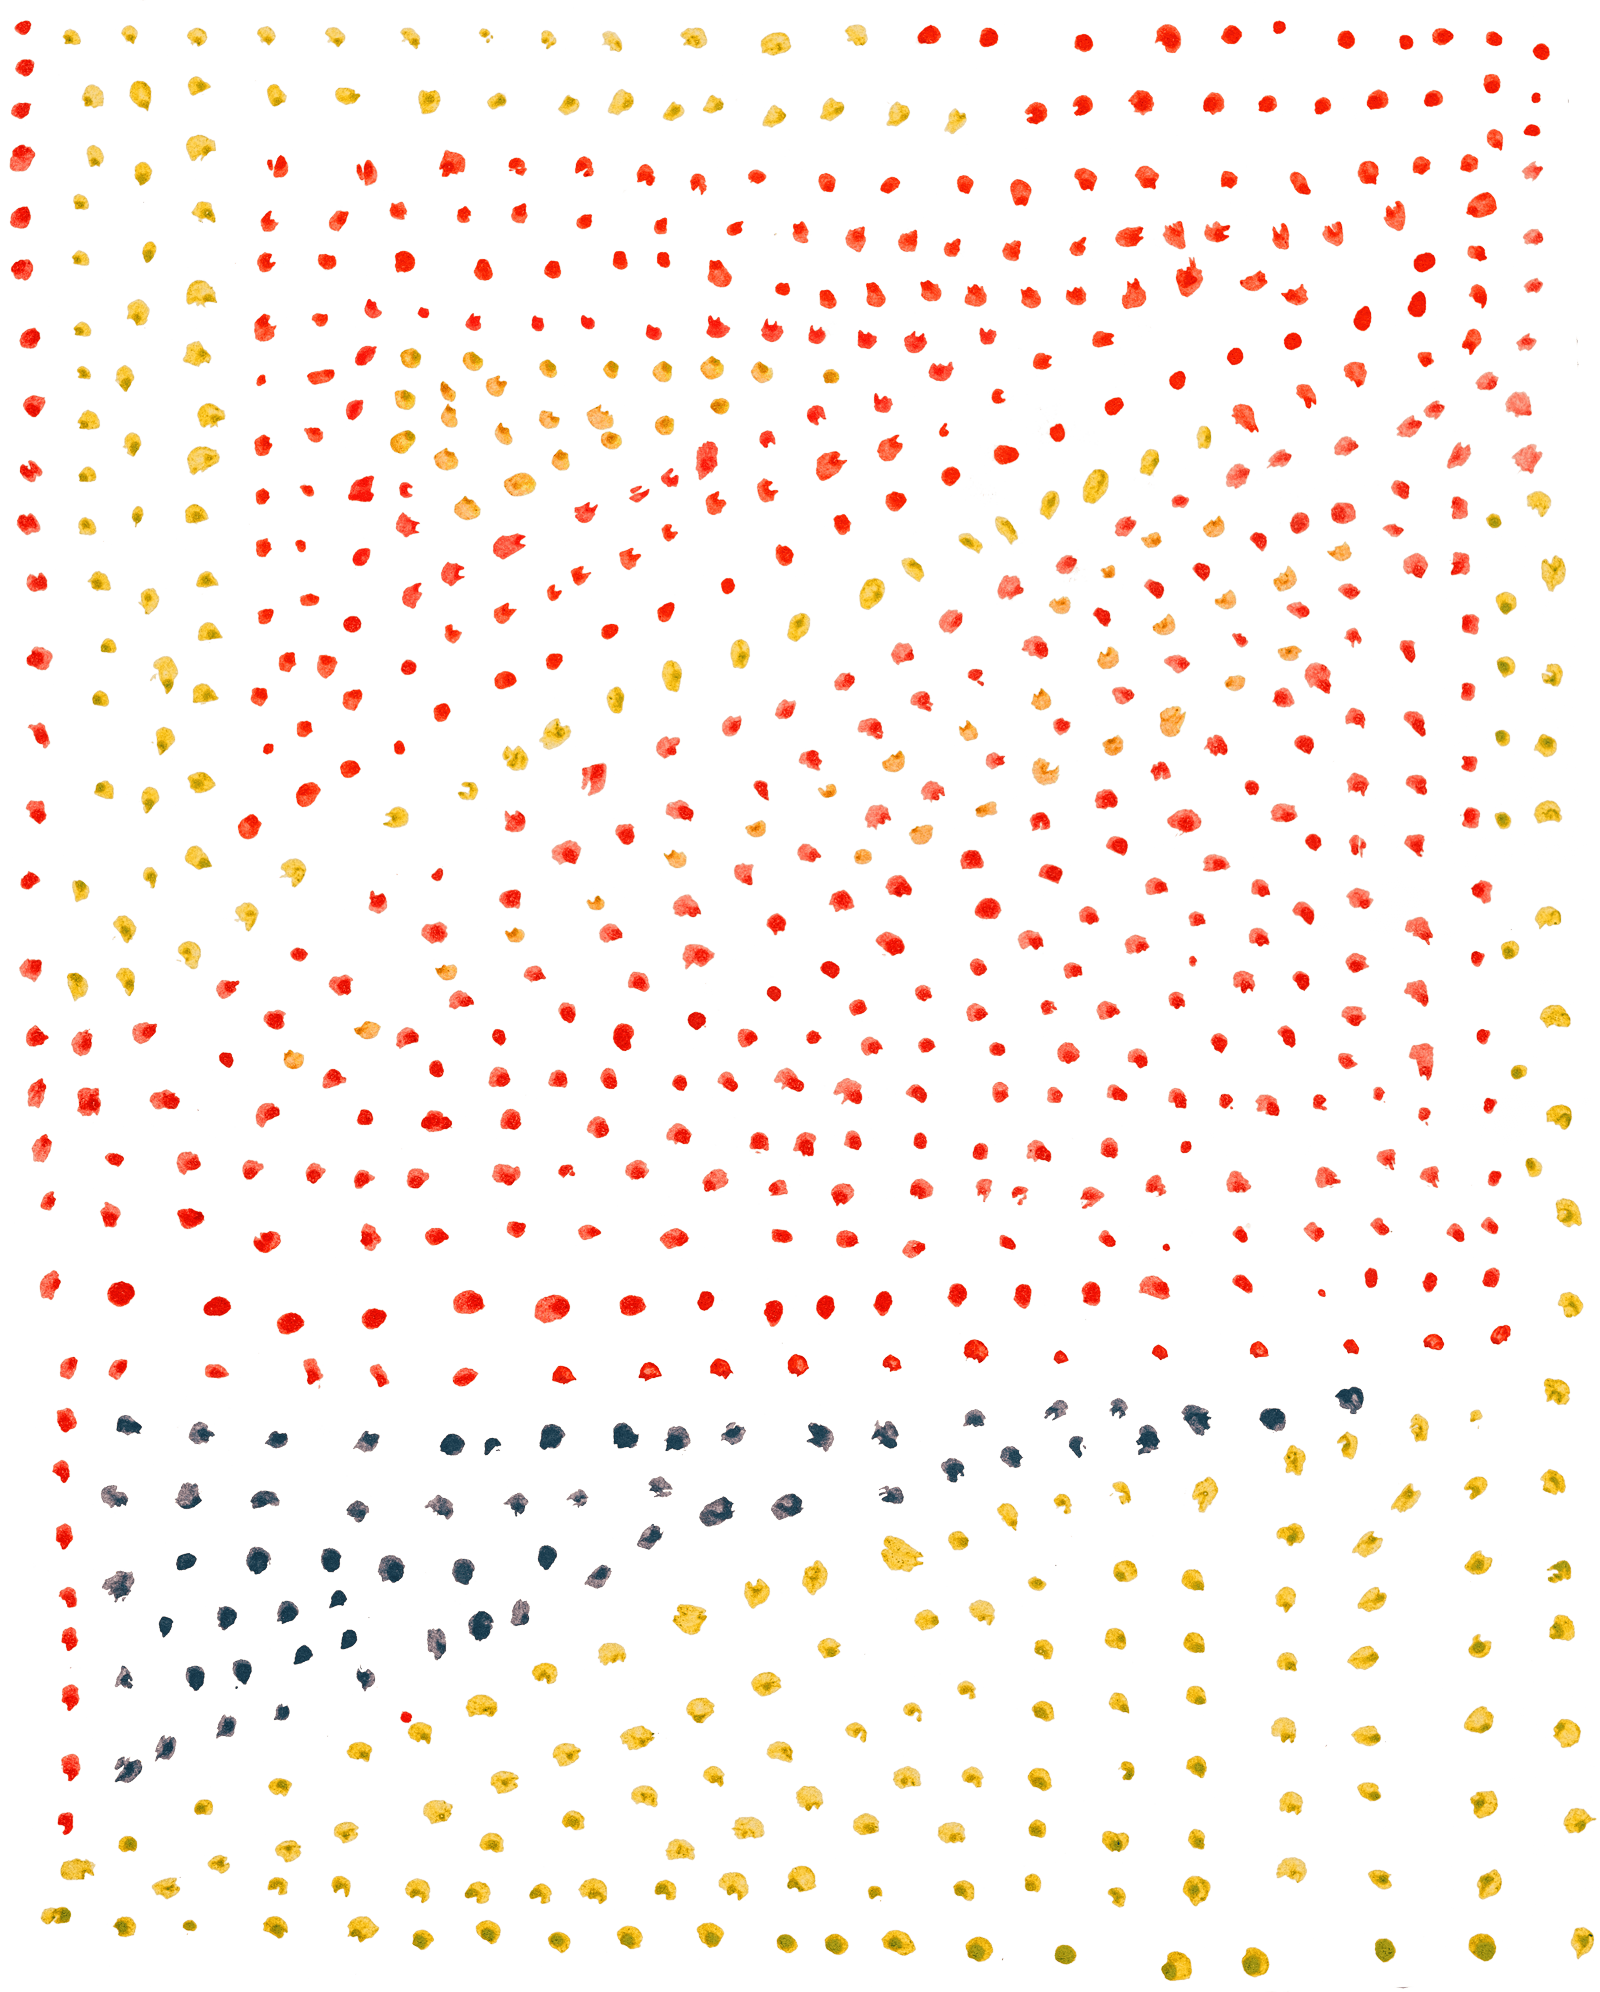 painted dots in red, yellow, and blue